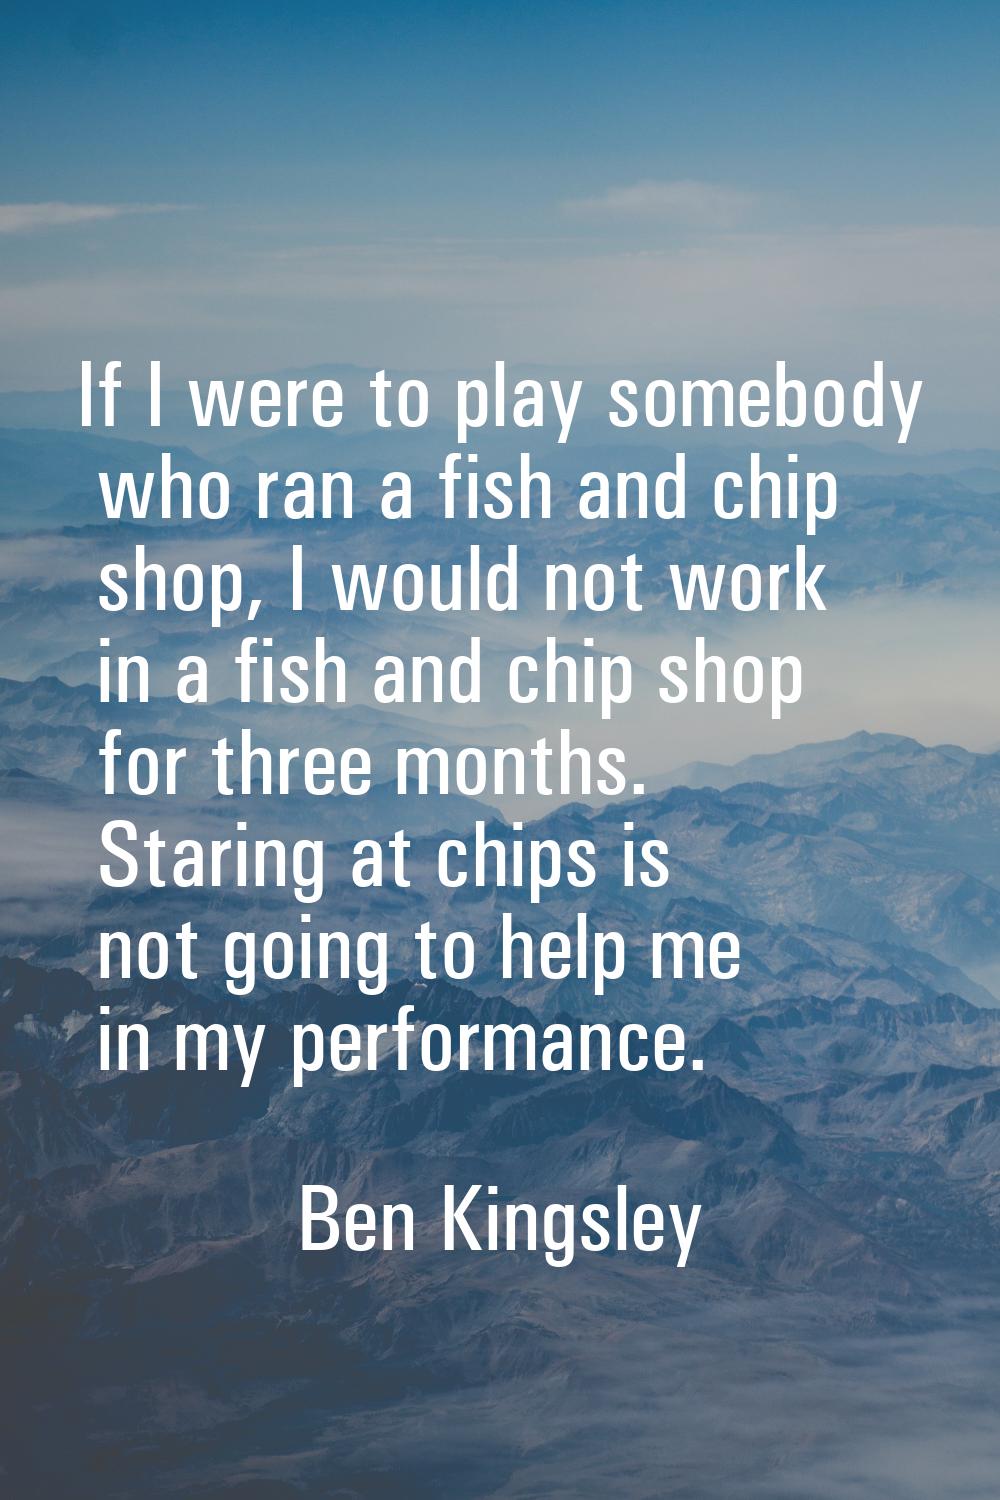 If I were to play somebody who ran a fish and chip shop, I would not work in a fish and chip shop f